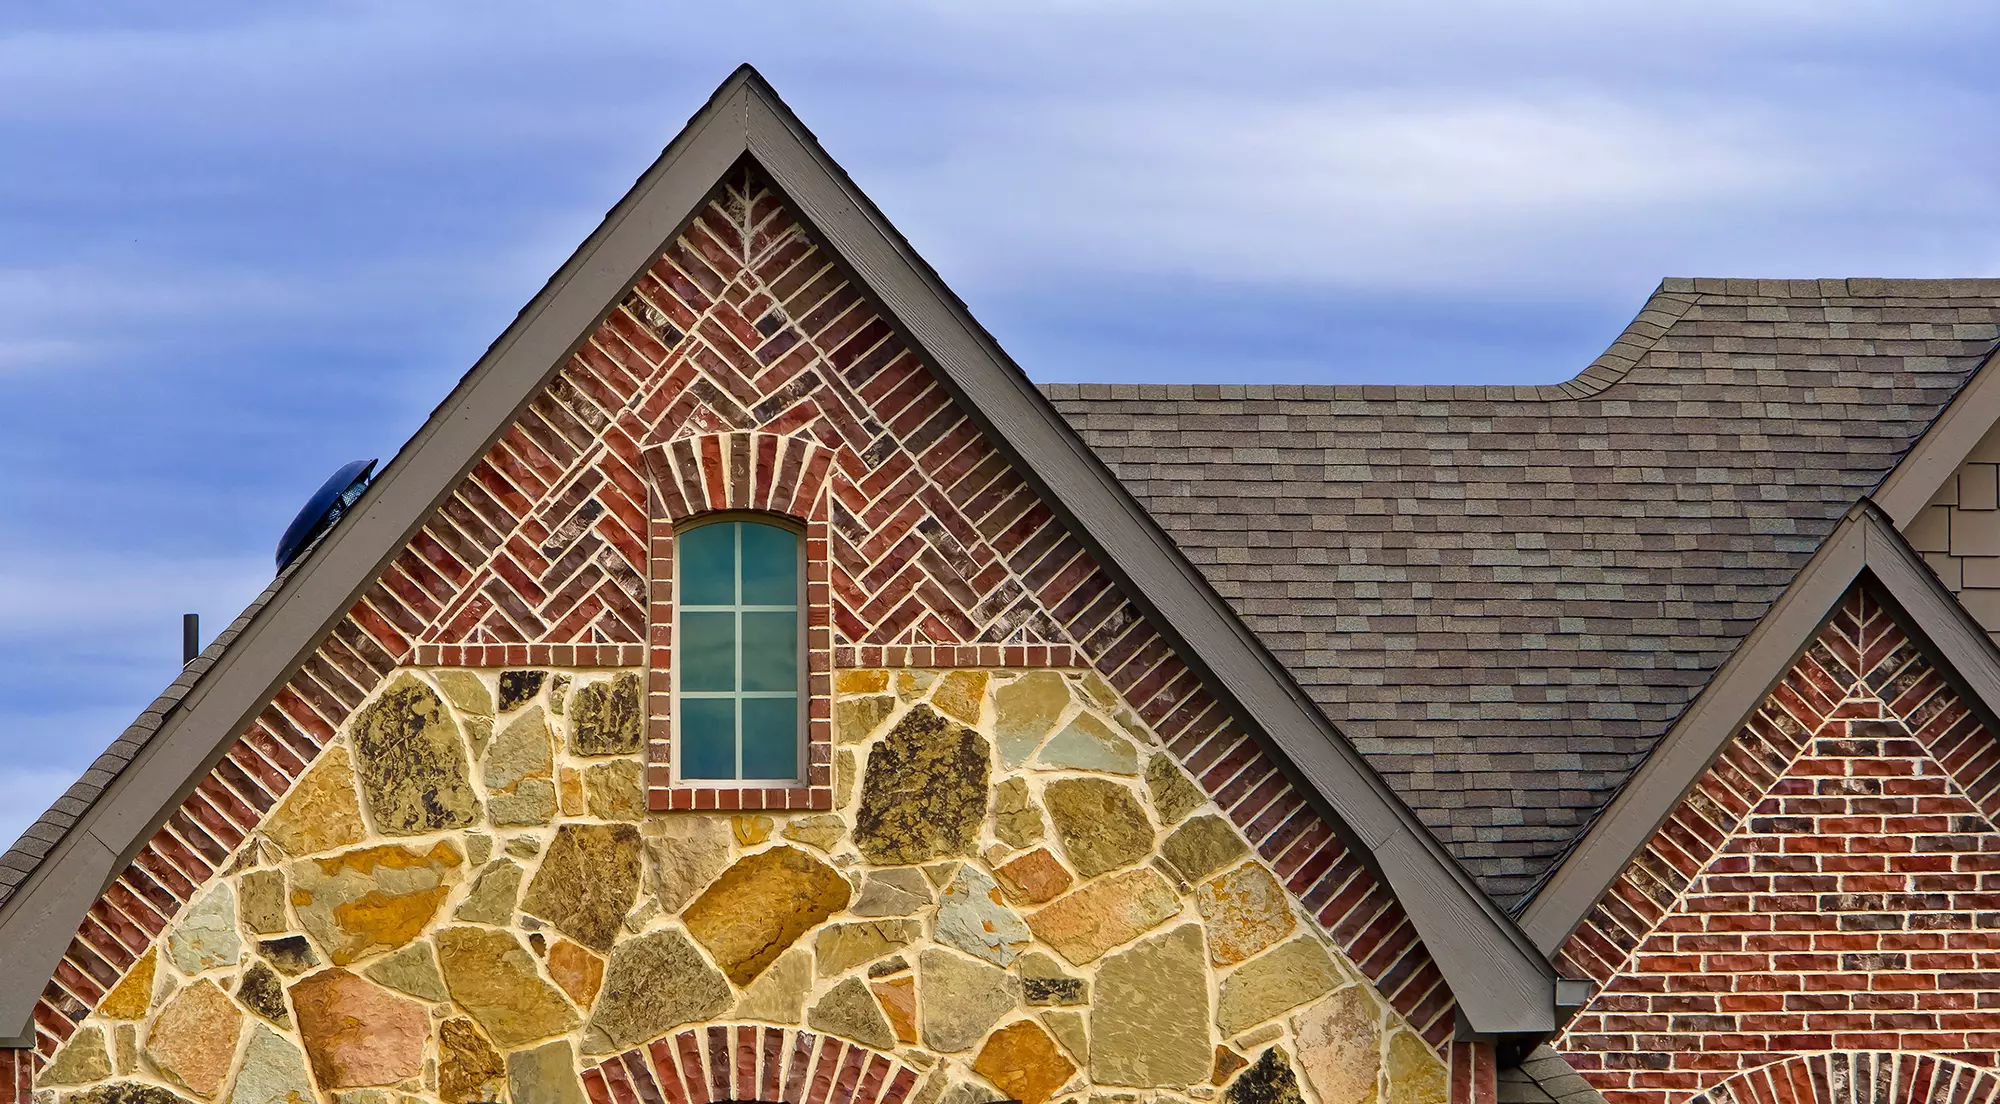 Which Roof Shingles Are Wind Resistant? - Best Choice Roofing